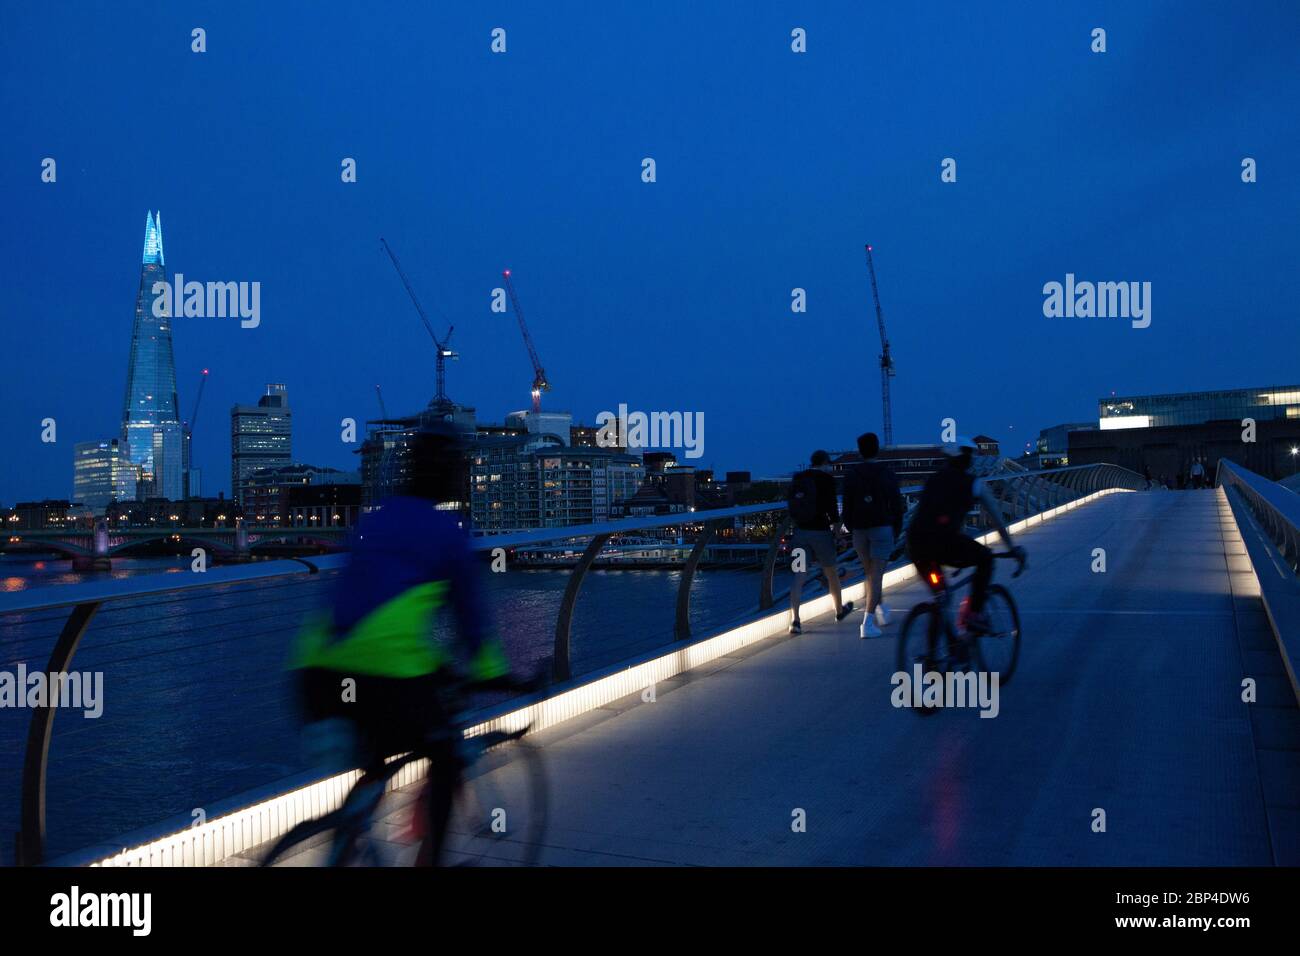 London, UK, 17 May 2020: People walk and cycle across the Milemmium Bridge as the top of the Shard is illuminated blue and Tate Modern carries signage saying 'Thank you key workers' to honour NHS staff and other care workers and frontline key workers. Anna Watson/Alamy Live News Stock Photo